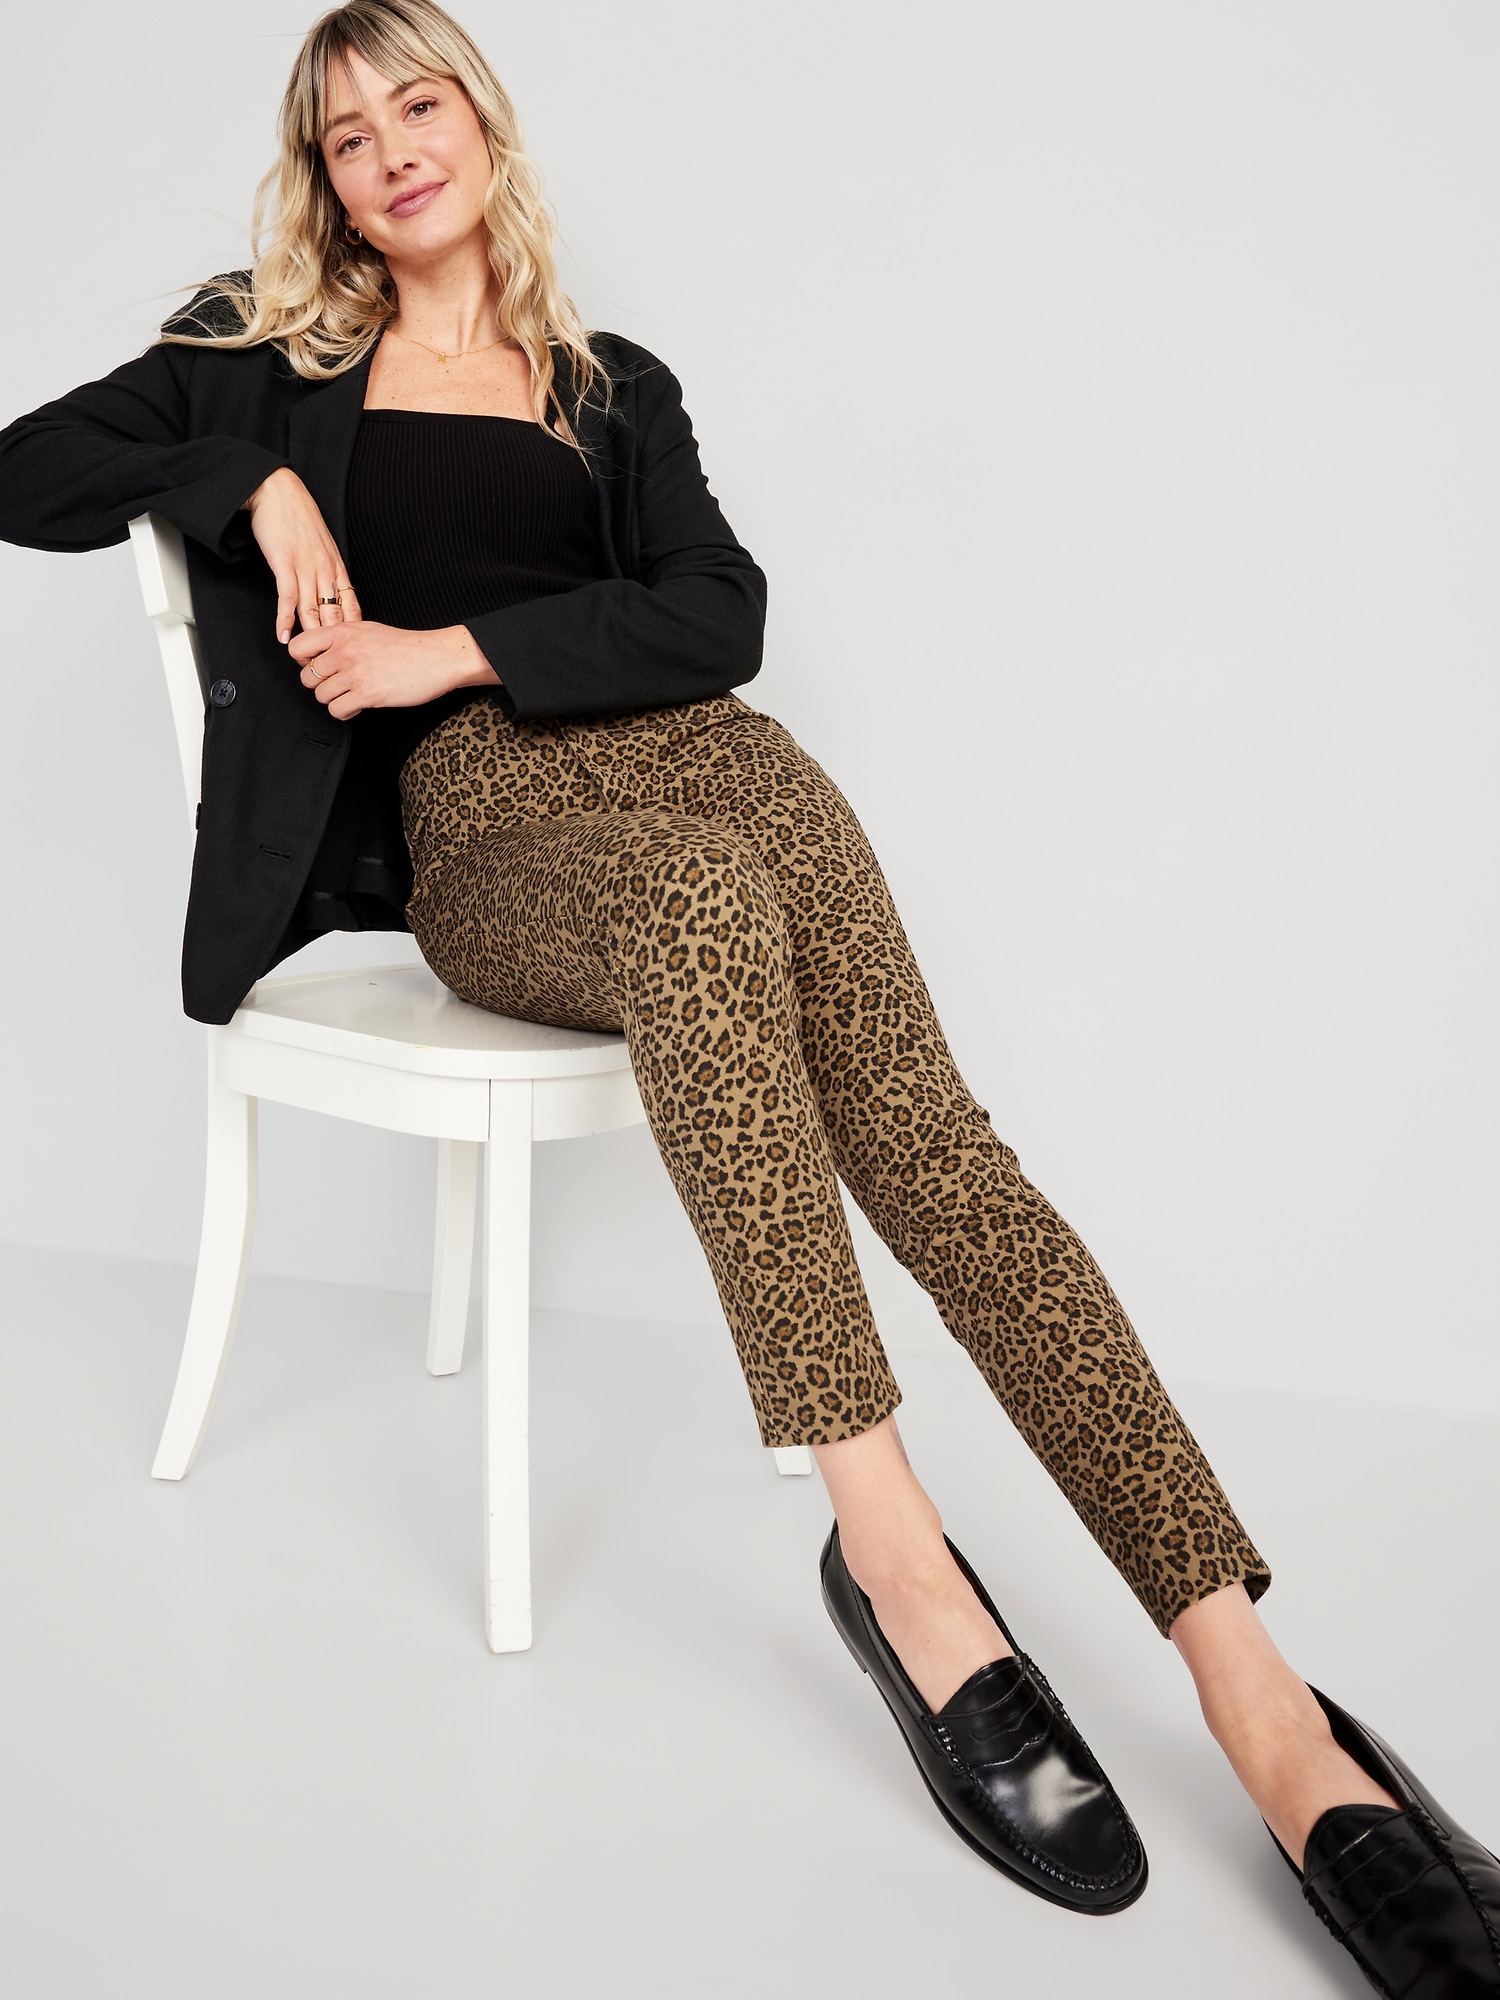 High-Waisted Pixie Skinny Ankle Pants for Women | Old Navy